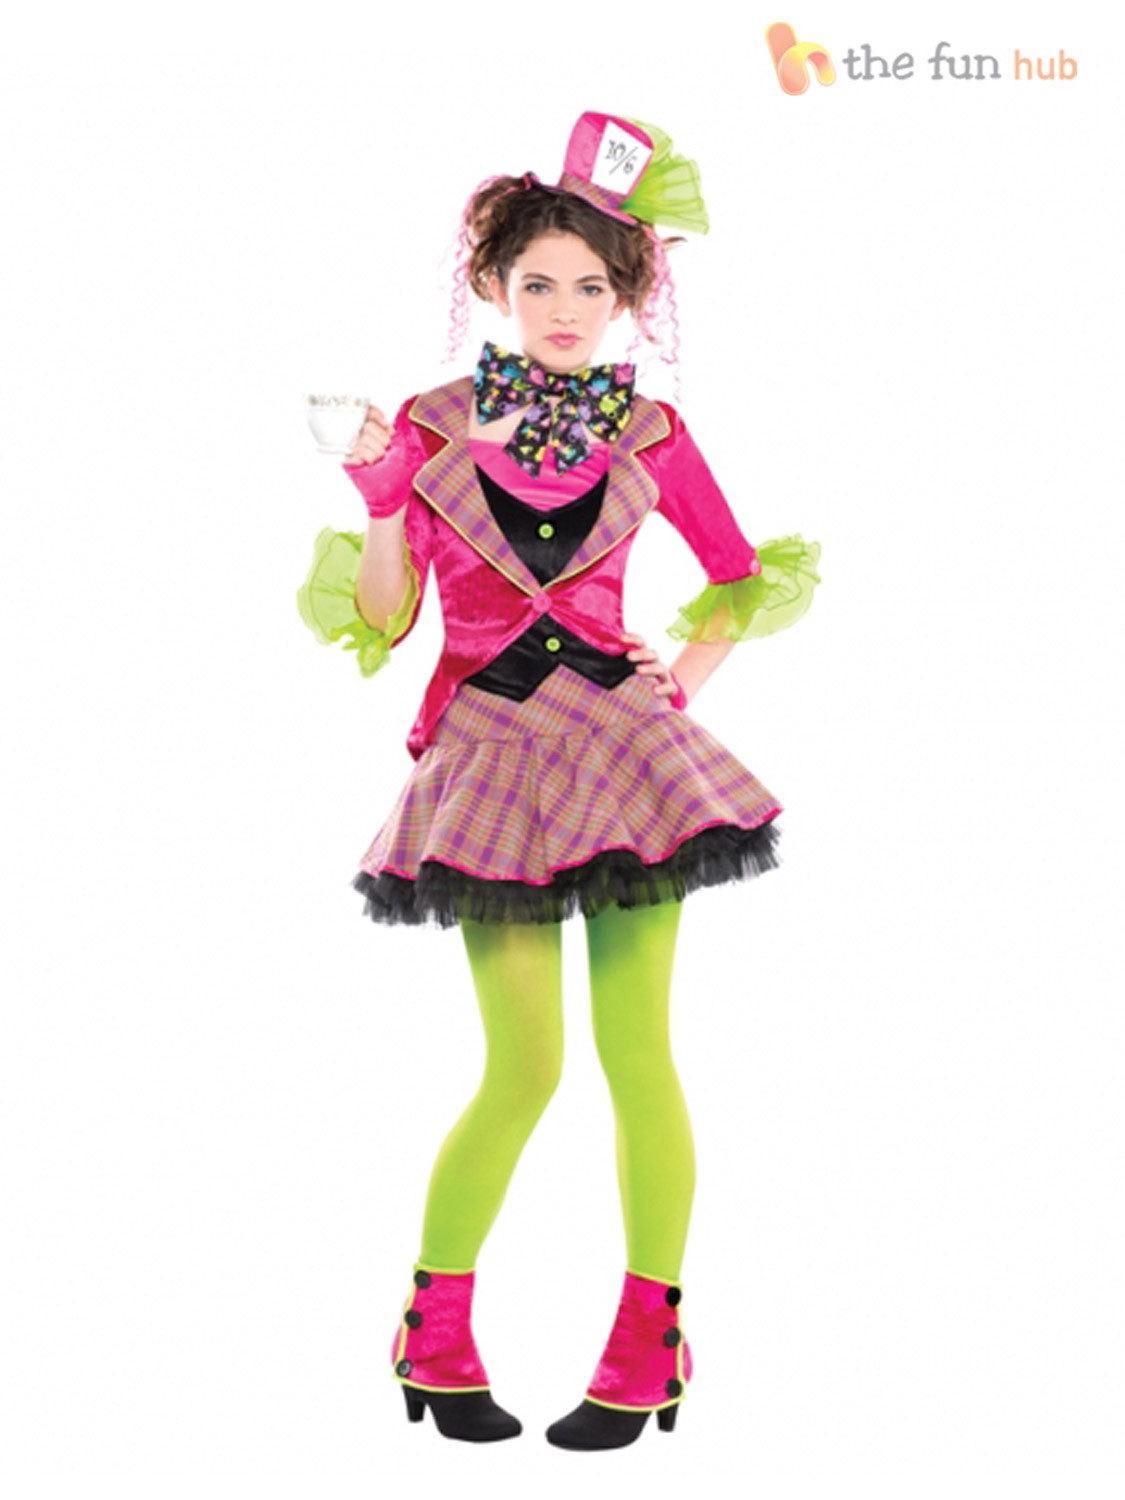 Mad Hatter Tea Party Costume Ideas
 Girls Mad Hatter Costume Tea Party Teen Fancy Dress Book